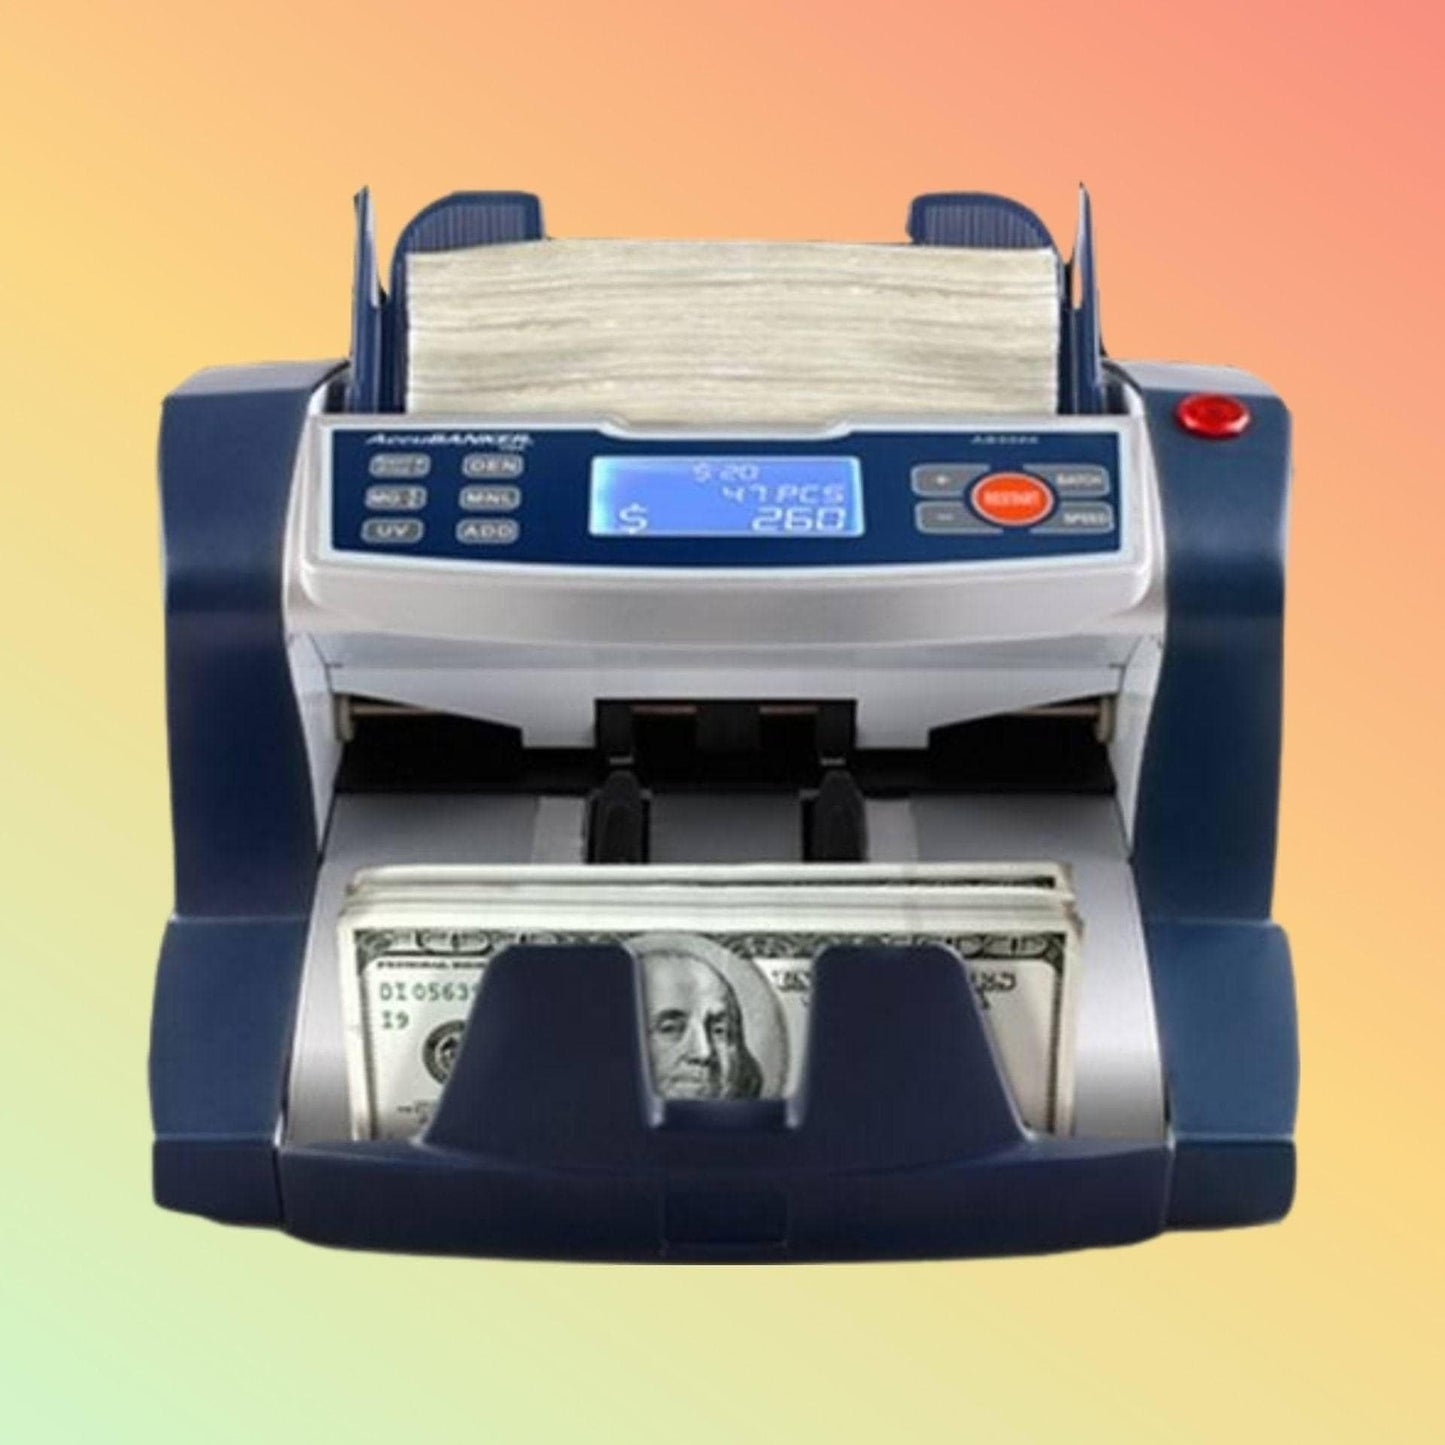 Bill Counter - AccuBanker AB5500 - Neotech